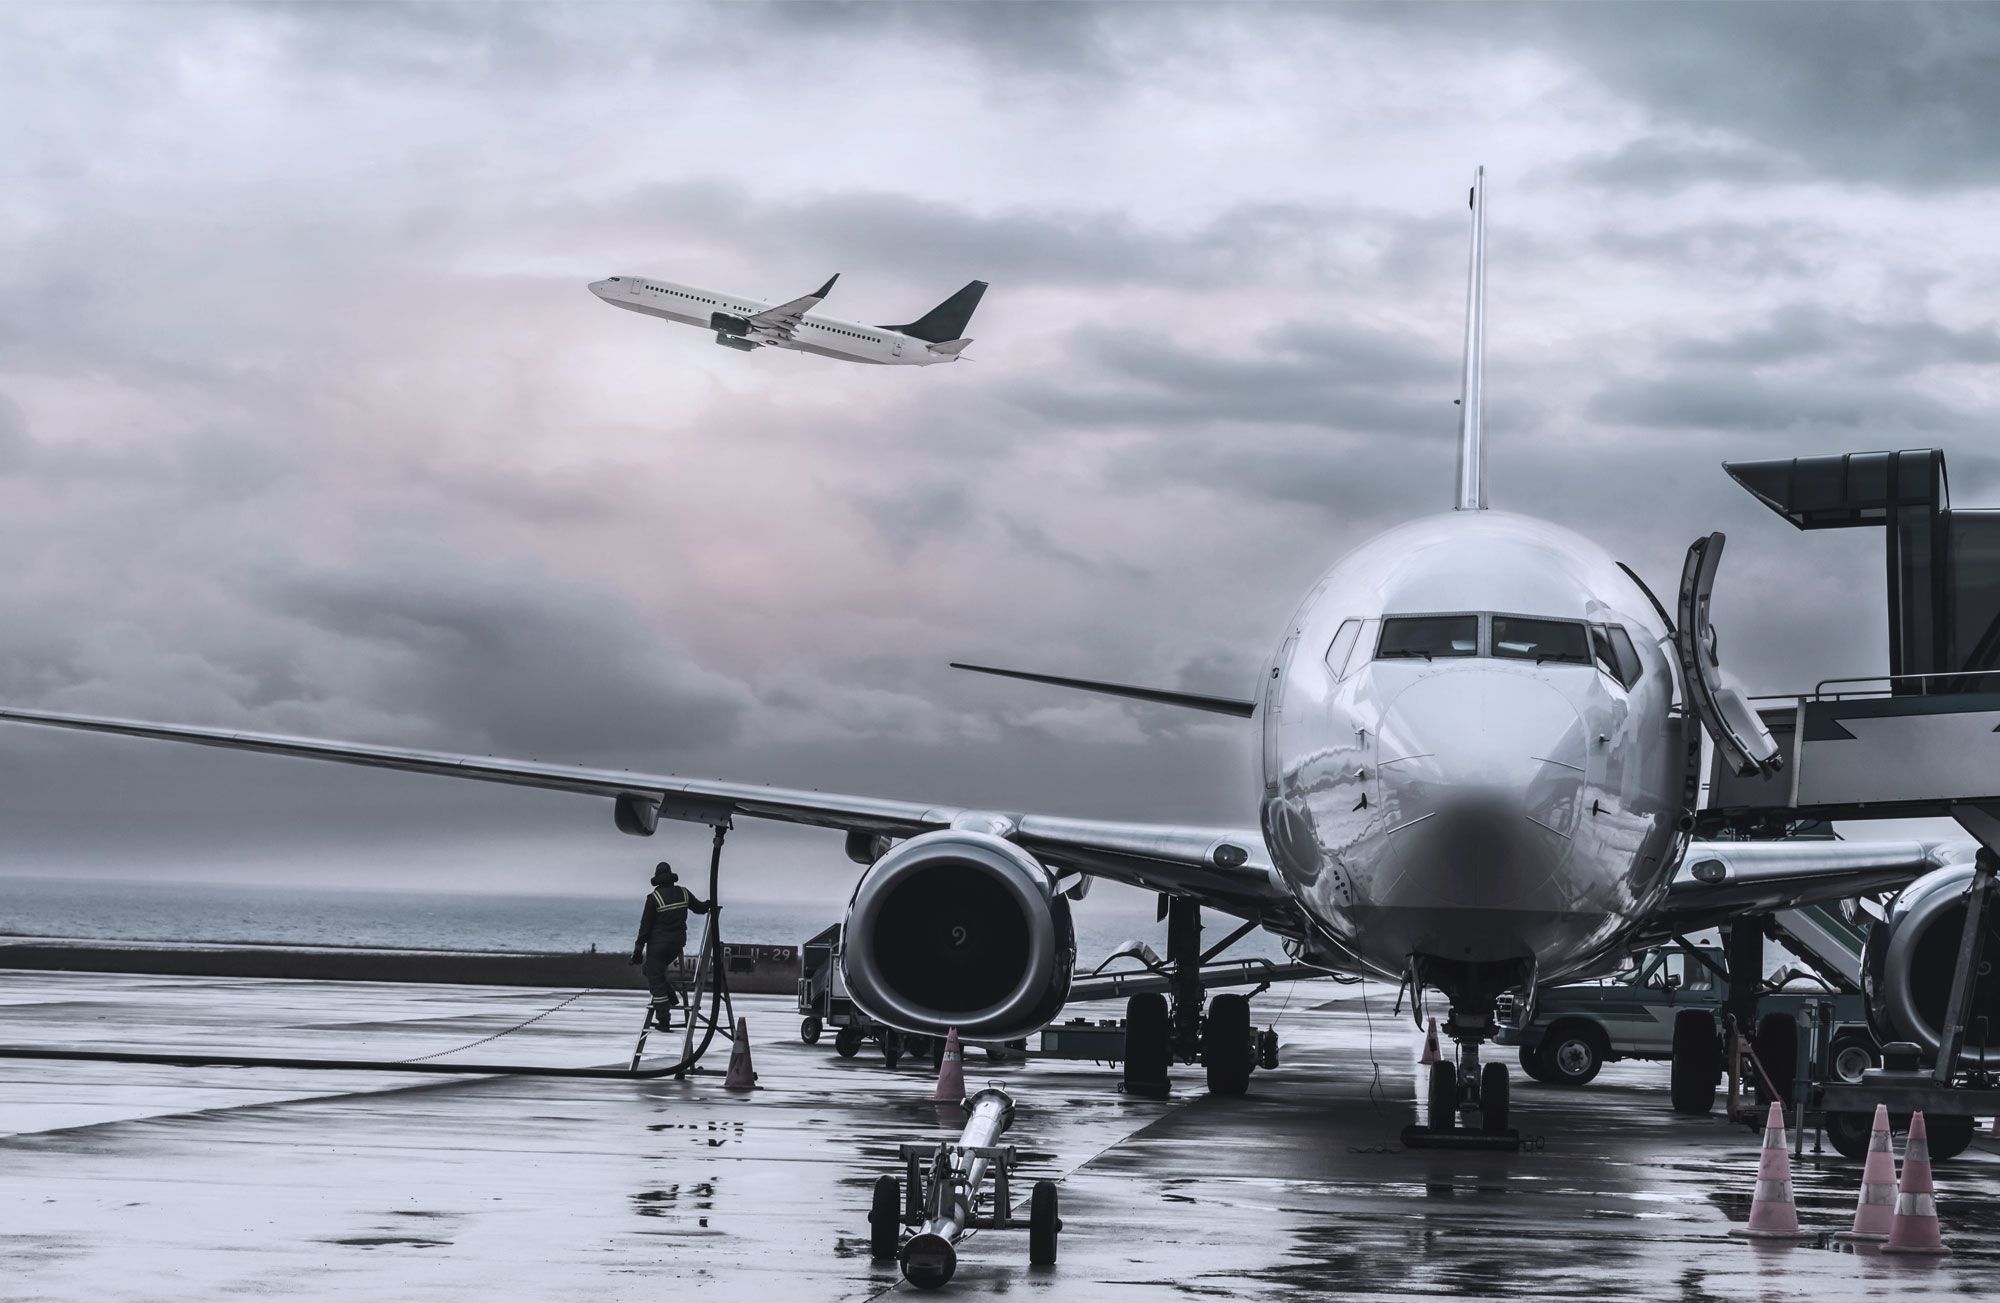 Airports header picture, showing an airport and two airplanes